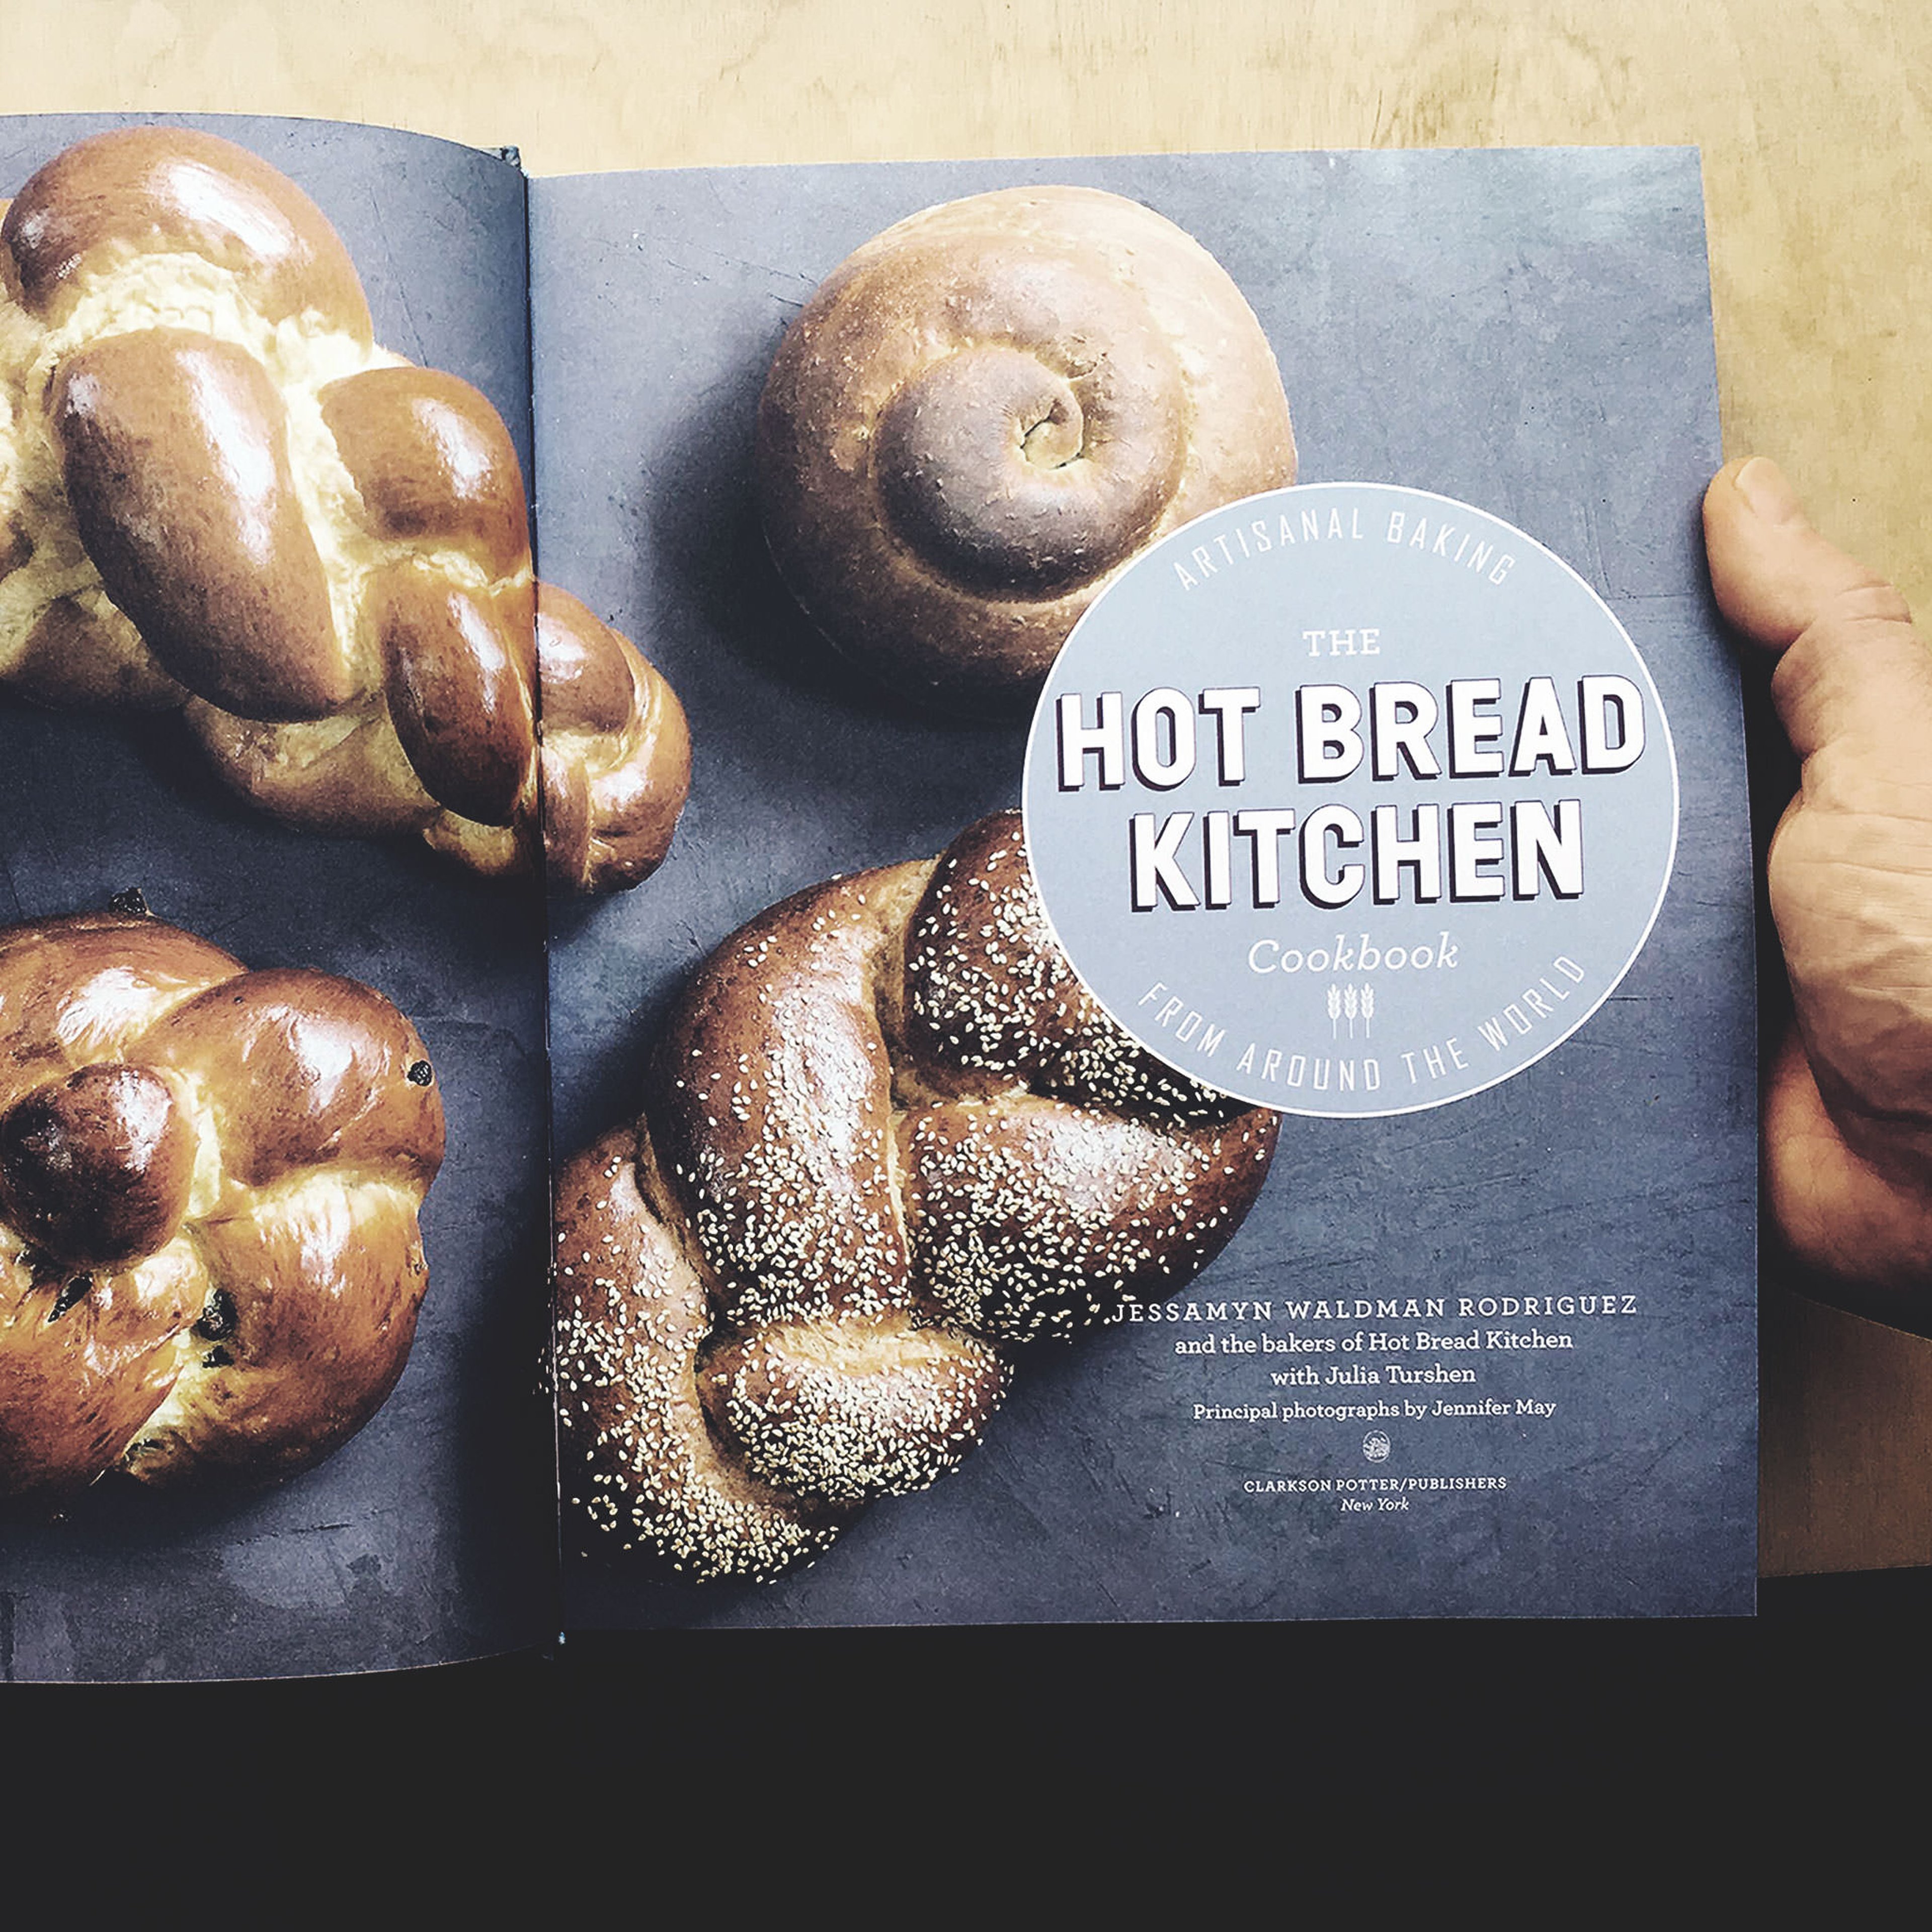 5 Lessons We Learned From "The Hot Bread Kitchen Cookbook"